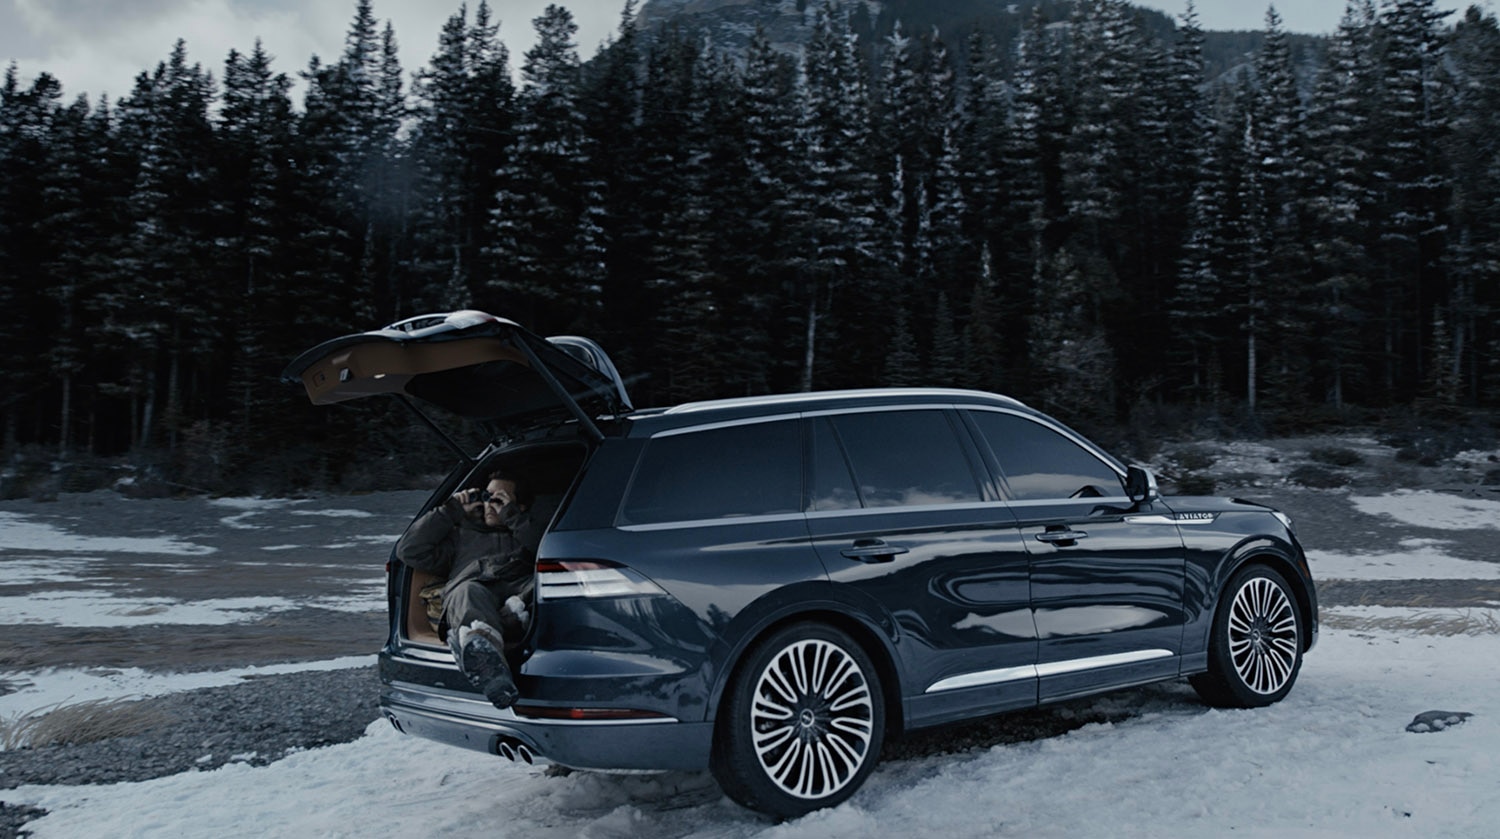 A dark blue 2020 Lincoln Aviator with liftgate open in snowy area